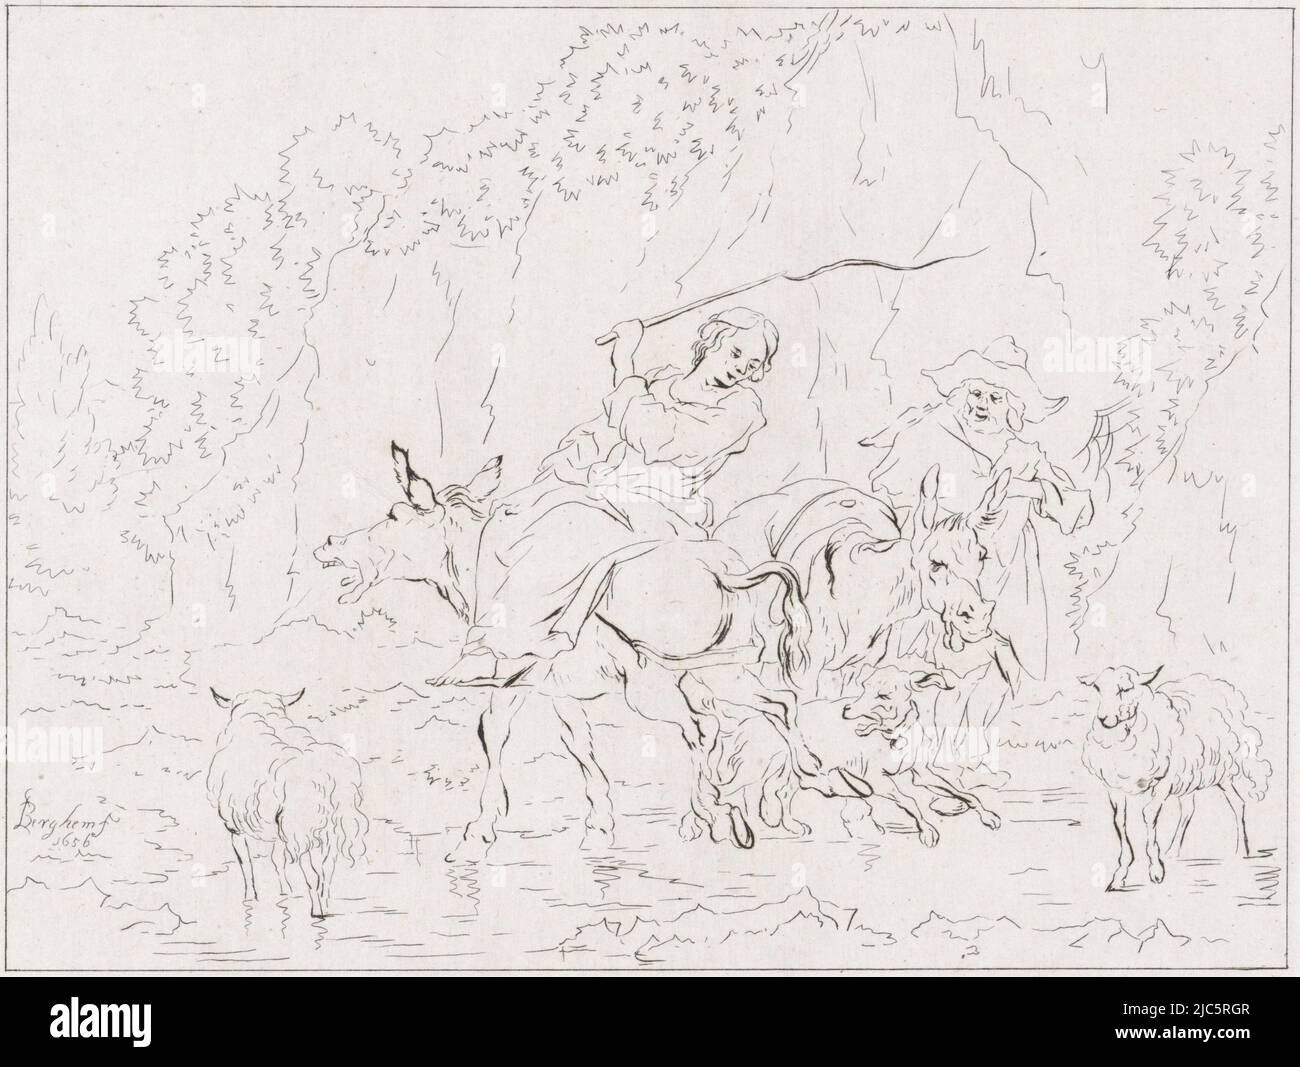 A shepherdess sits on a balding donkey, which is crossing a stream, kicking its hind legs. She holds a branch above her head and watches a dog leap to the hind legs of her donkey. A shepherd with a second donkey stands at the water's edge. In the water are two sheep,, Shepherd and shepherdess, print maker: Diederik Jan Singendonck, (mentioned on object), Nicolaes Pietersz. Berchem, (mentioned on object), Utrecht, 1815, paper, etching, h 217 mm × w 261 mm Stock Photo